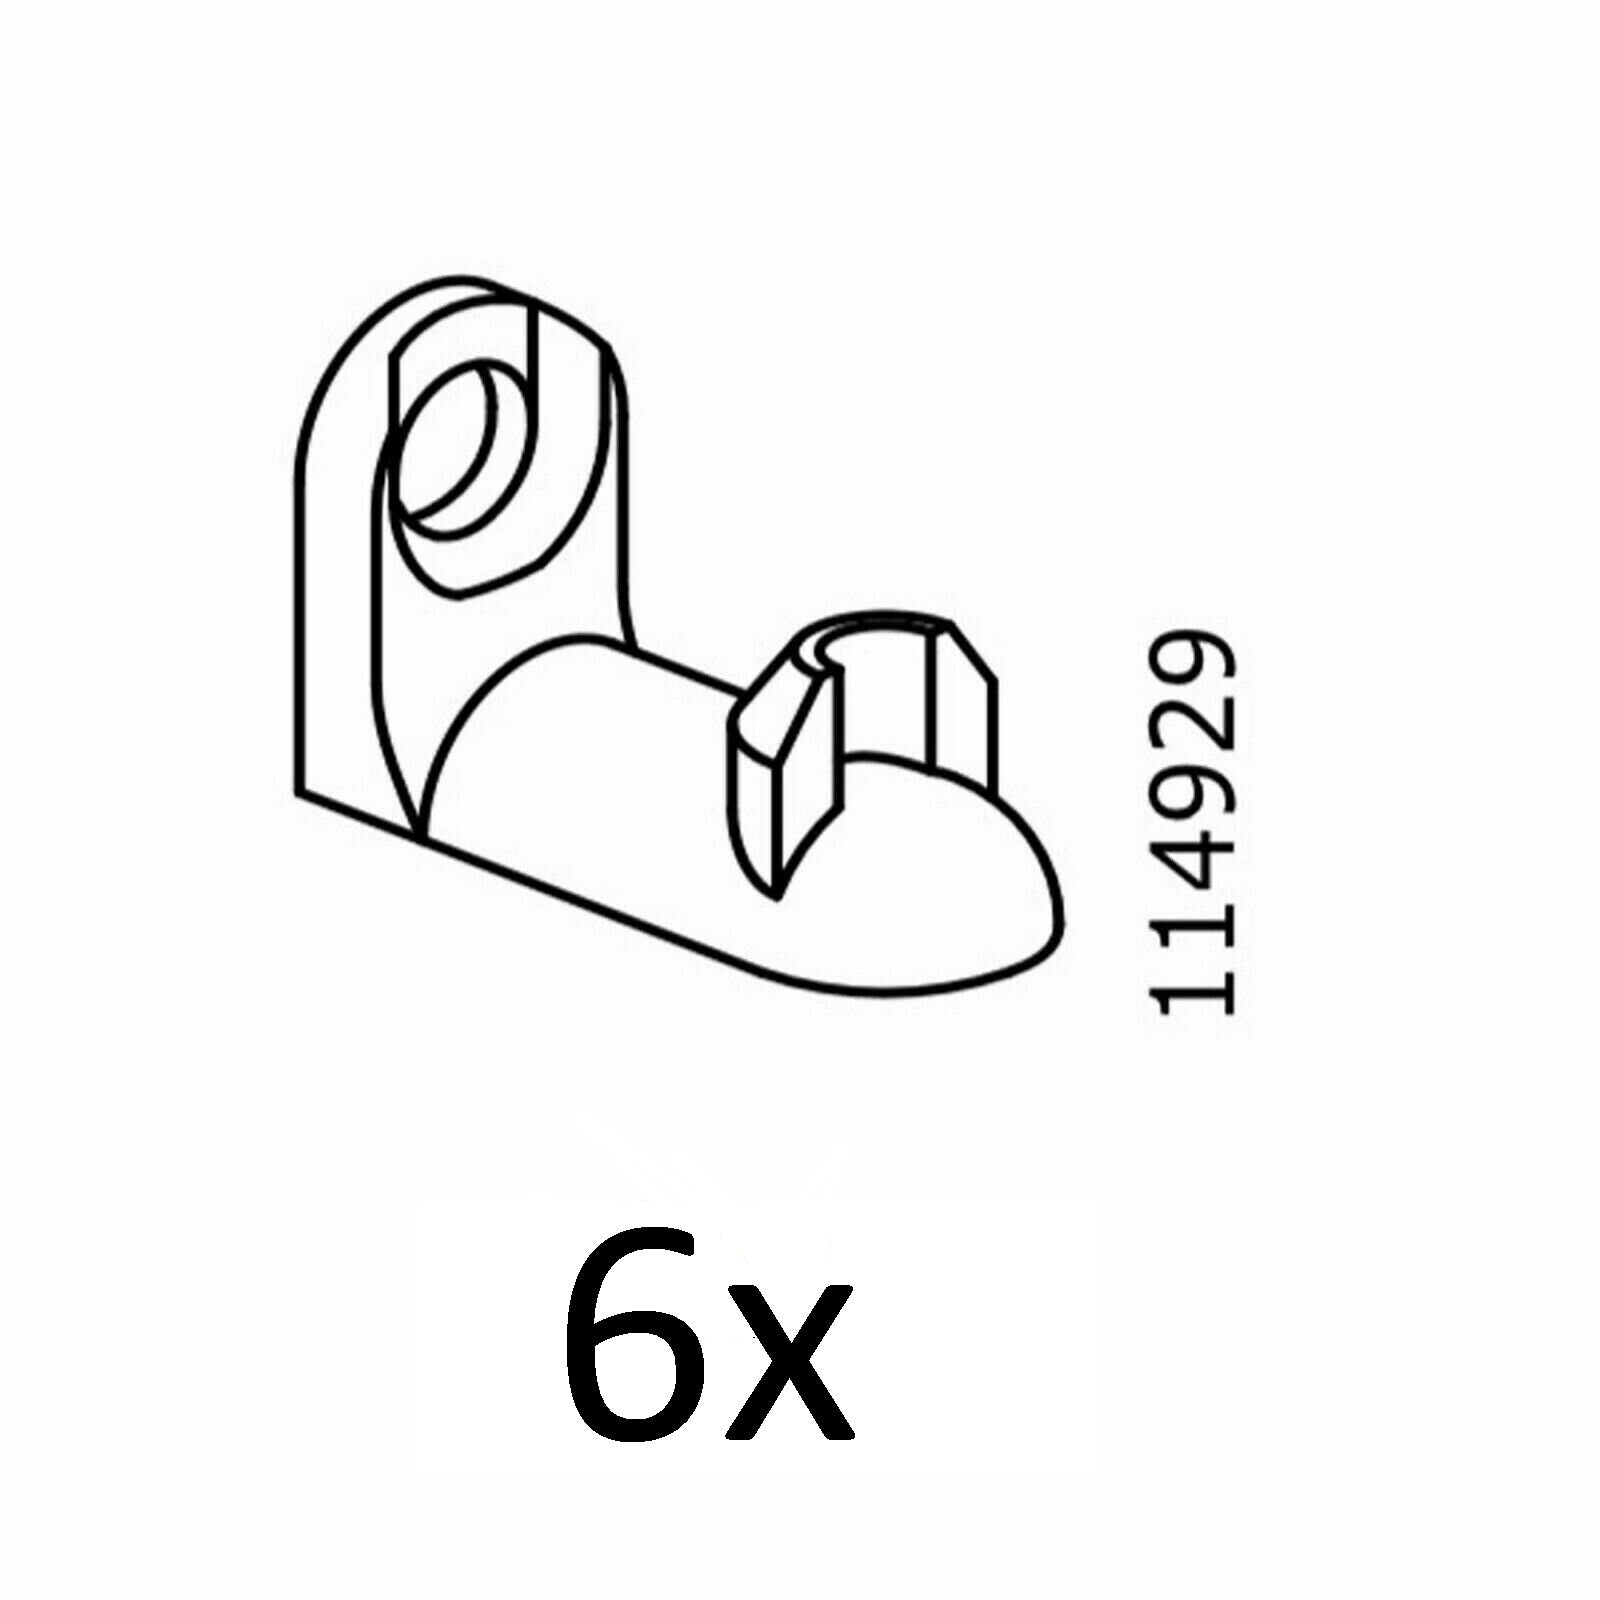 IKEA Shelf Supports Part # 114929 (6 pack)